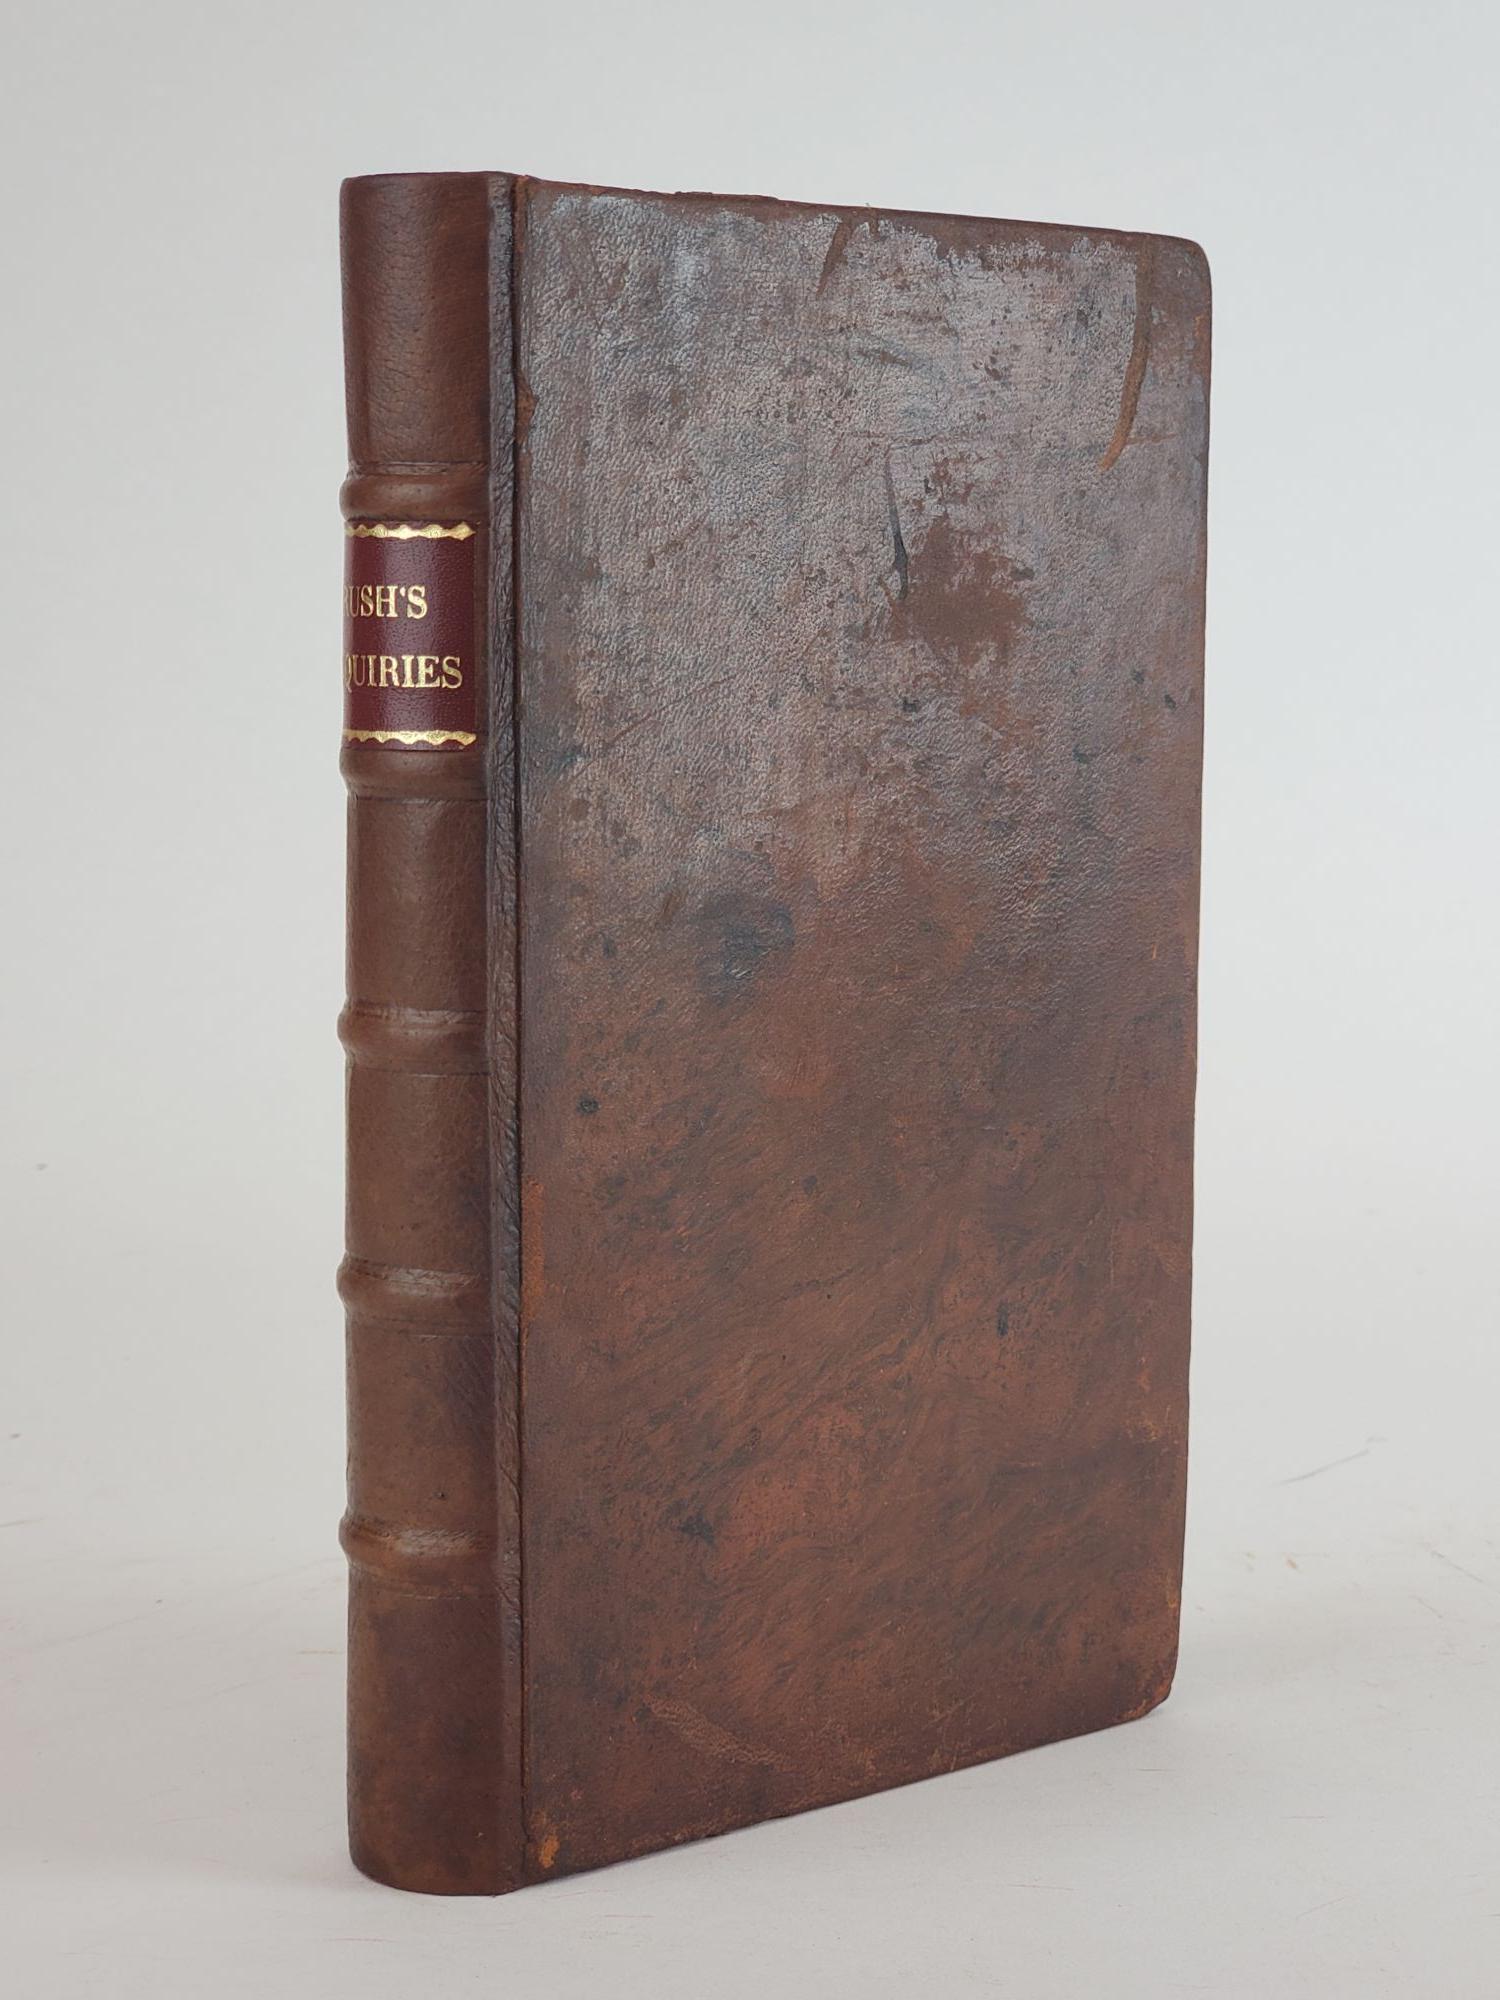 Product Image for MEDICAL INQUIRIES AND OBSERVATIONS CONTAINING AN ACCOUNT OF THE YELLOW FEVER, AS IT APPEARED IN PHILADELPHIA IN 1797, AND OBSERVATIONS UPON THE NATURE AND CURE OF THE GOUT, AND HYDROPHOBIA (Volume Five Only)